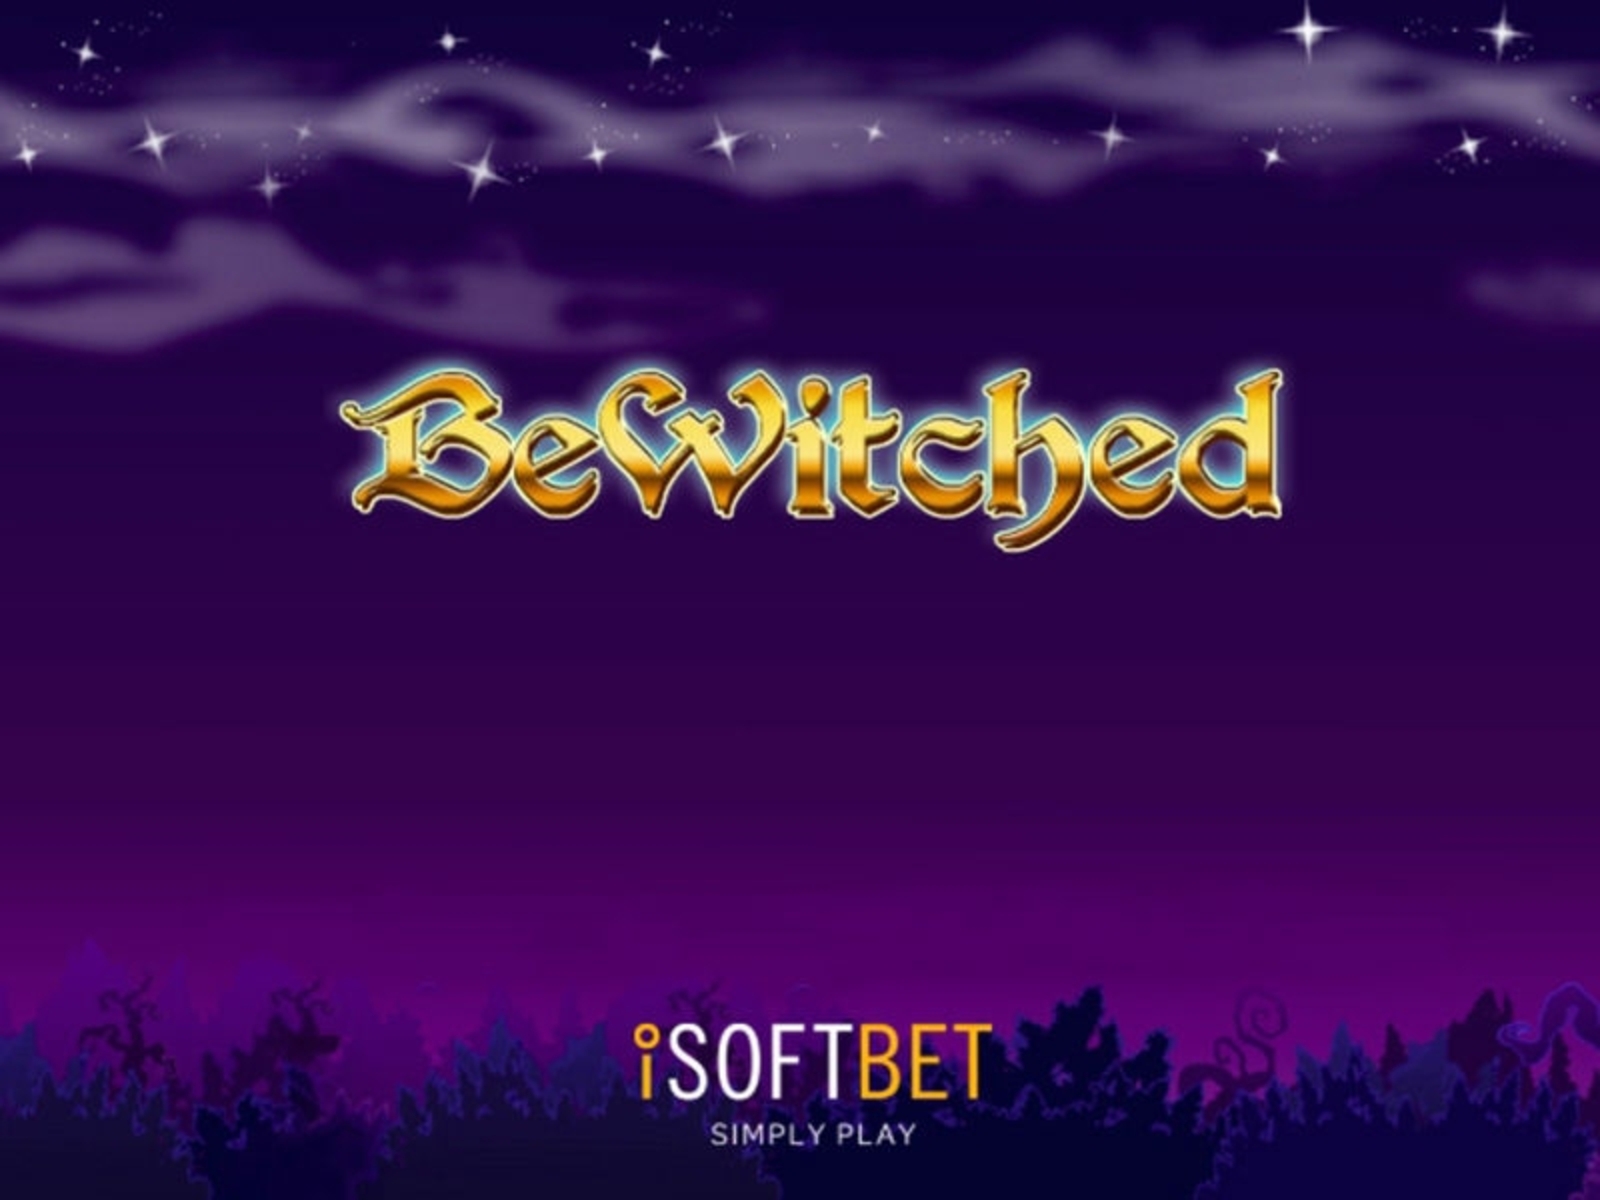 Bewitched demo